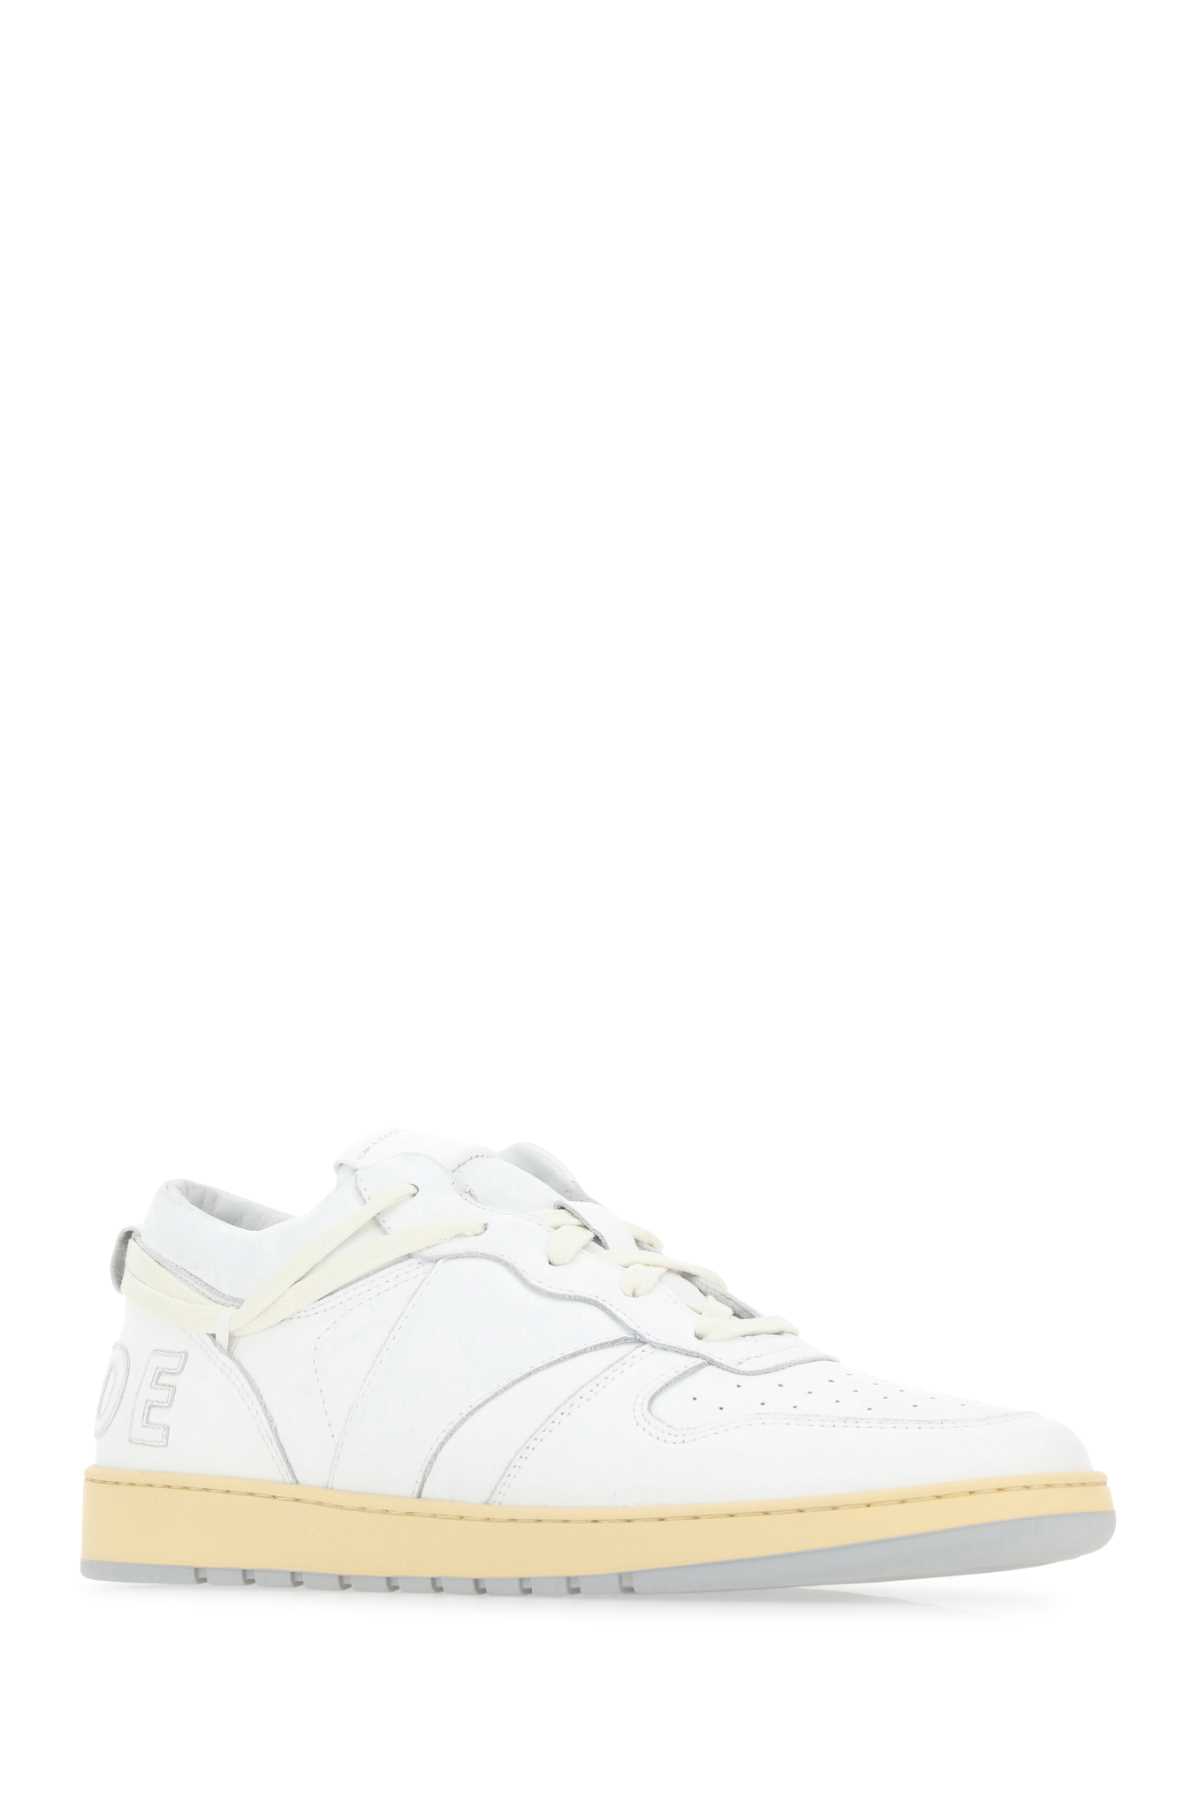 Shop Rhude White Leather Rhecess Sneakers In 0444